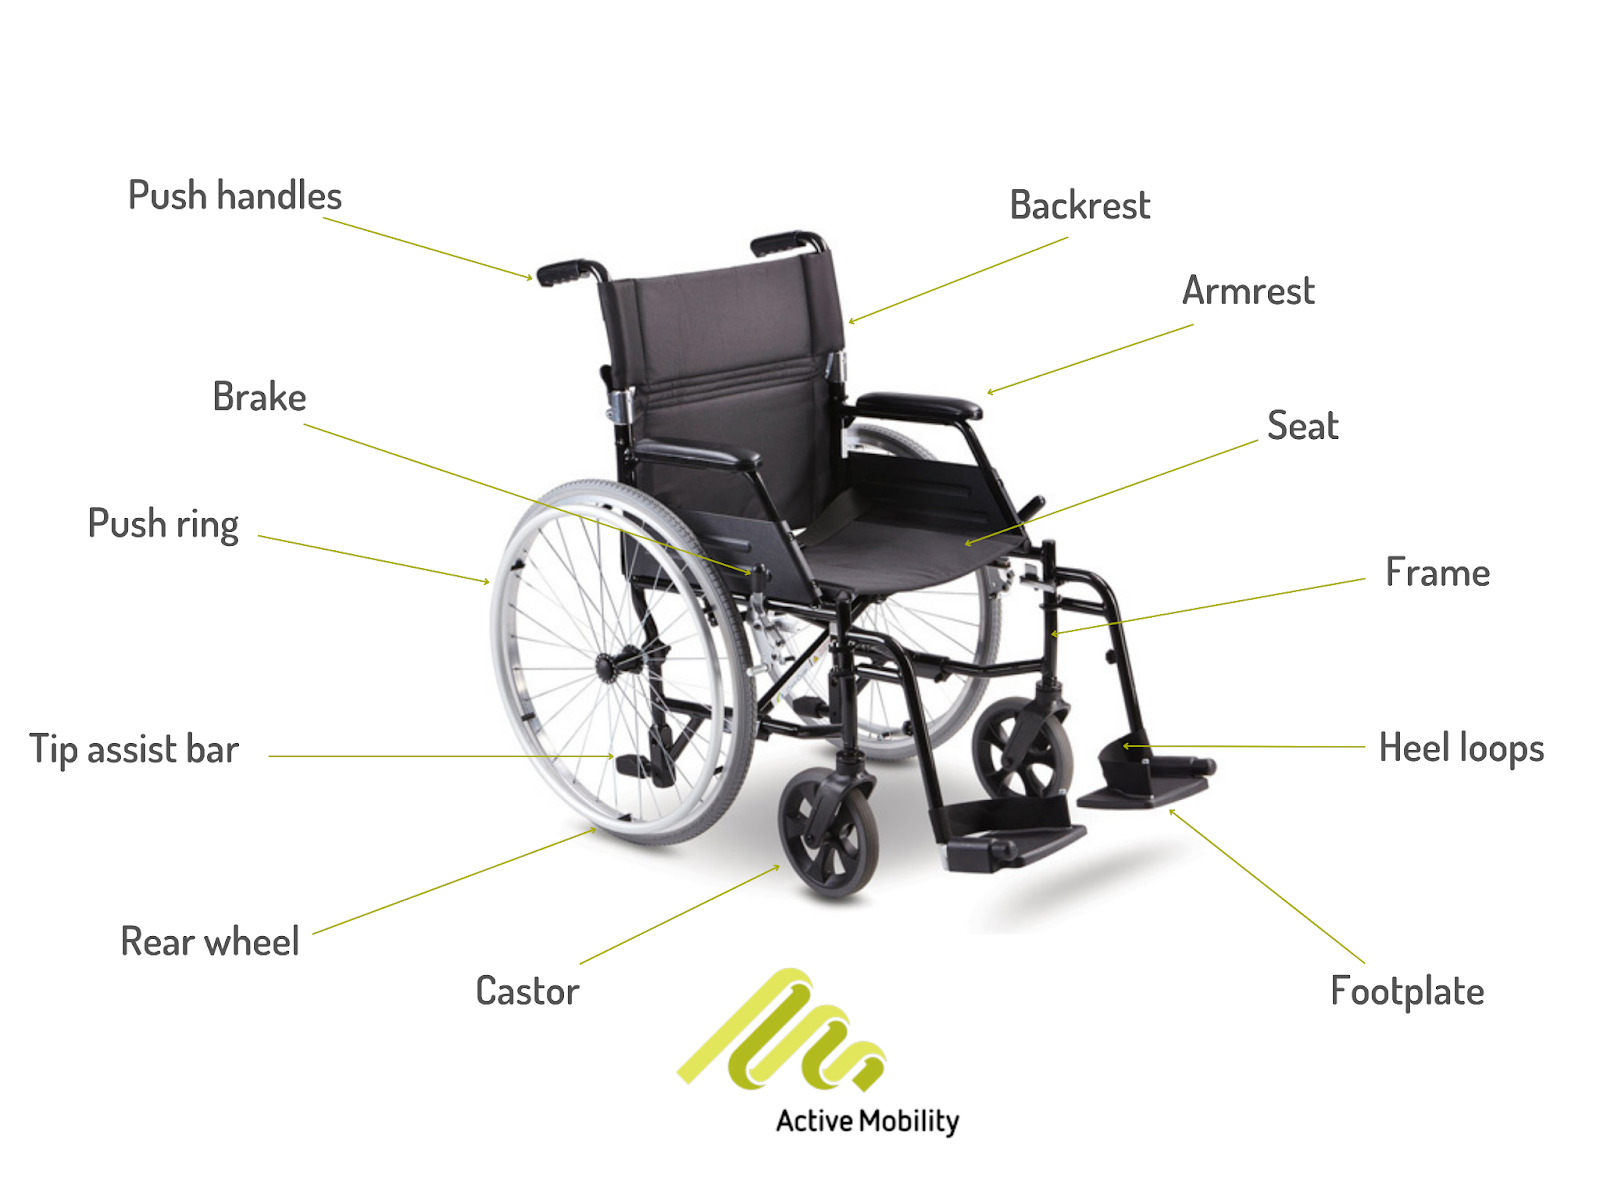 The parts of a wheelchair you need to know for regular maintenance & repairs